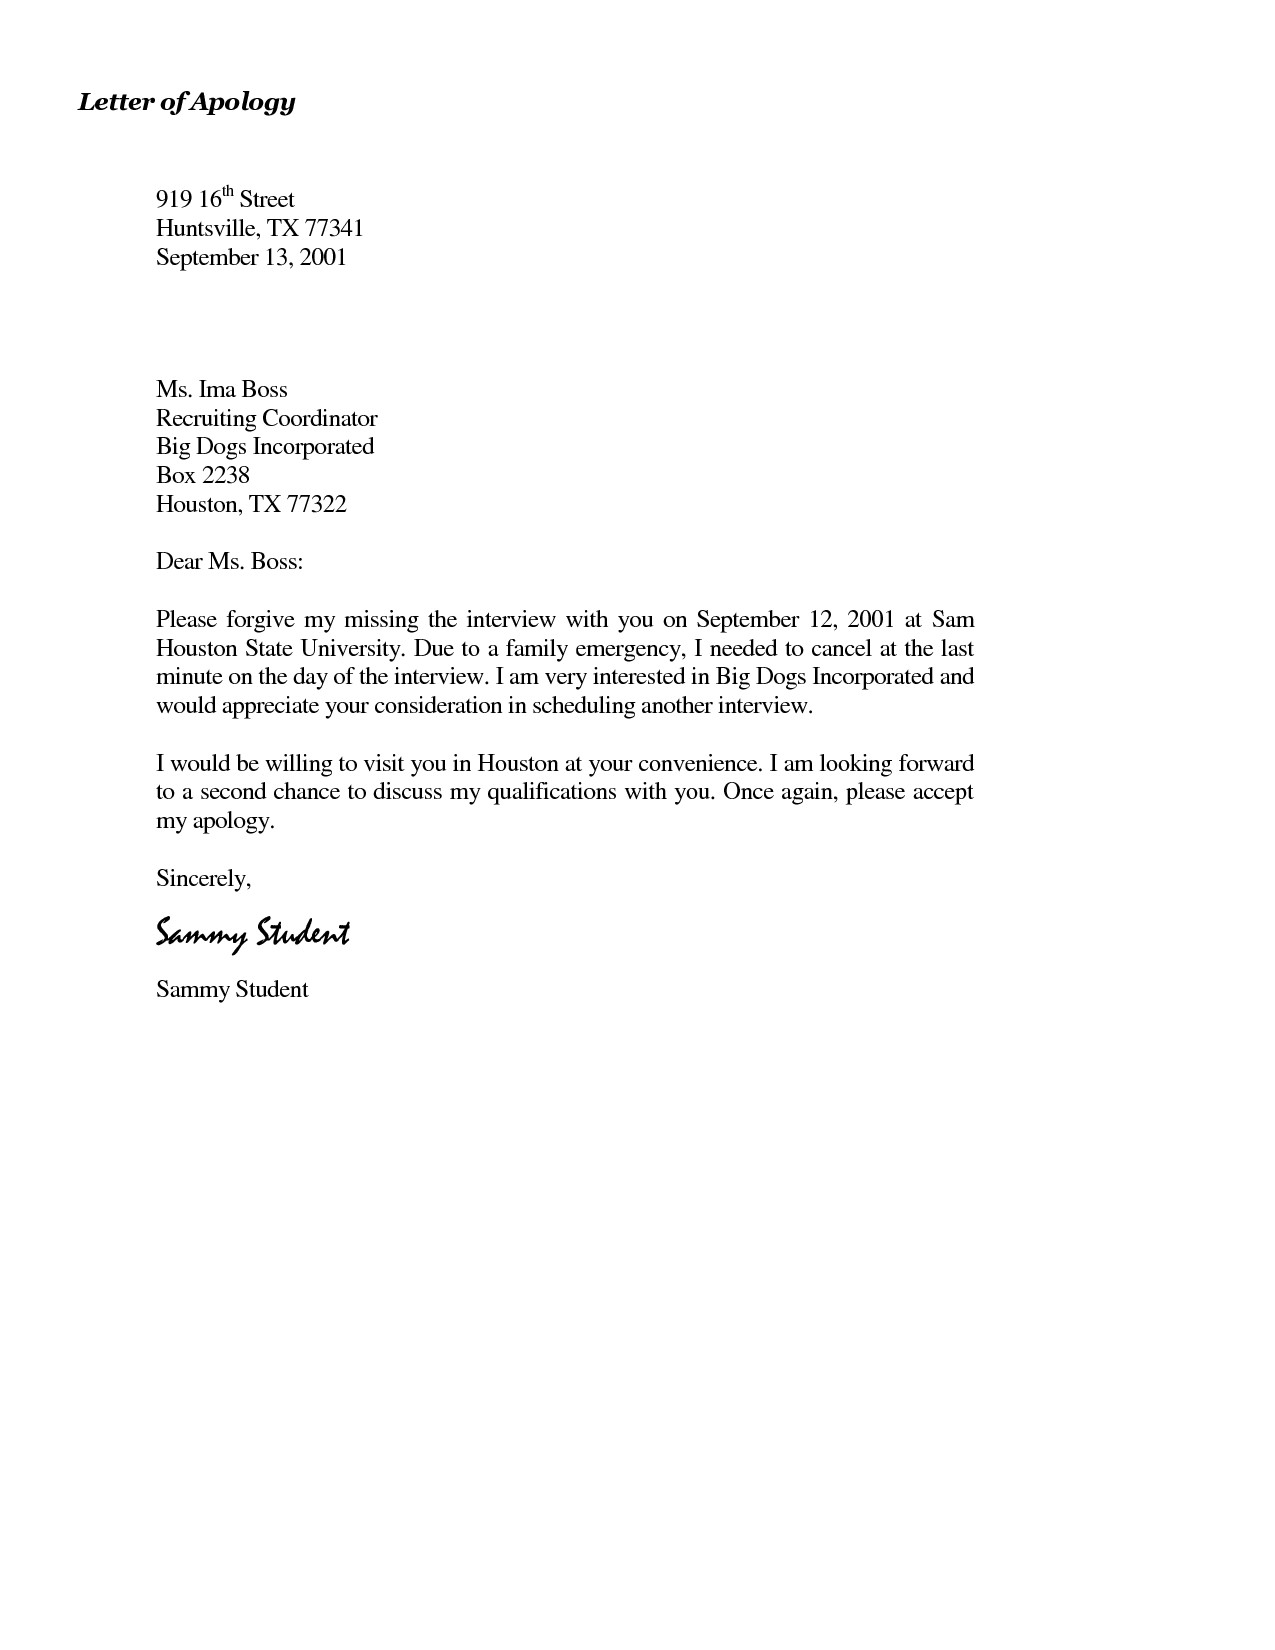 Simple Formal Letter of Apology To Boss with 2 Paragraph